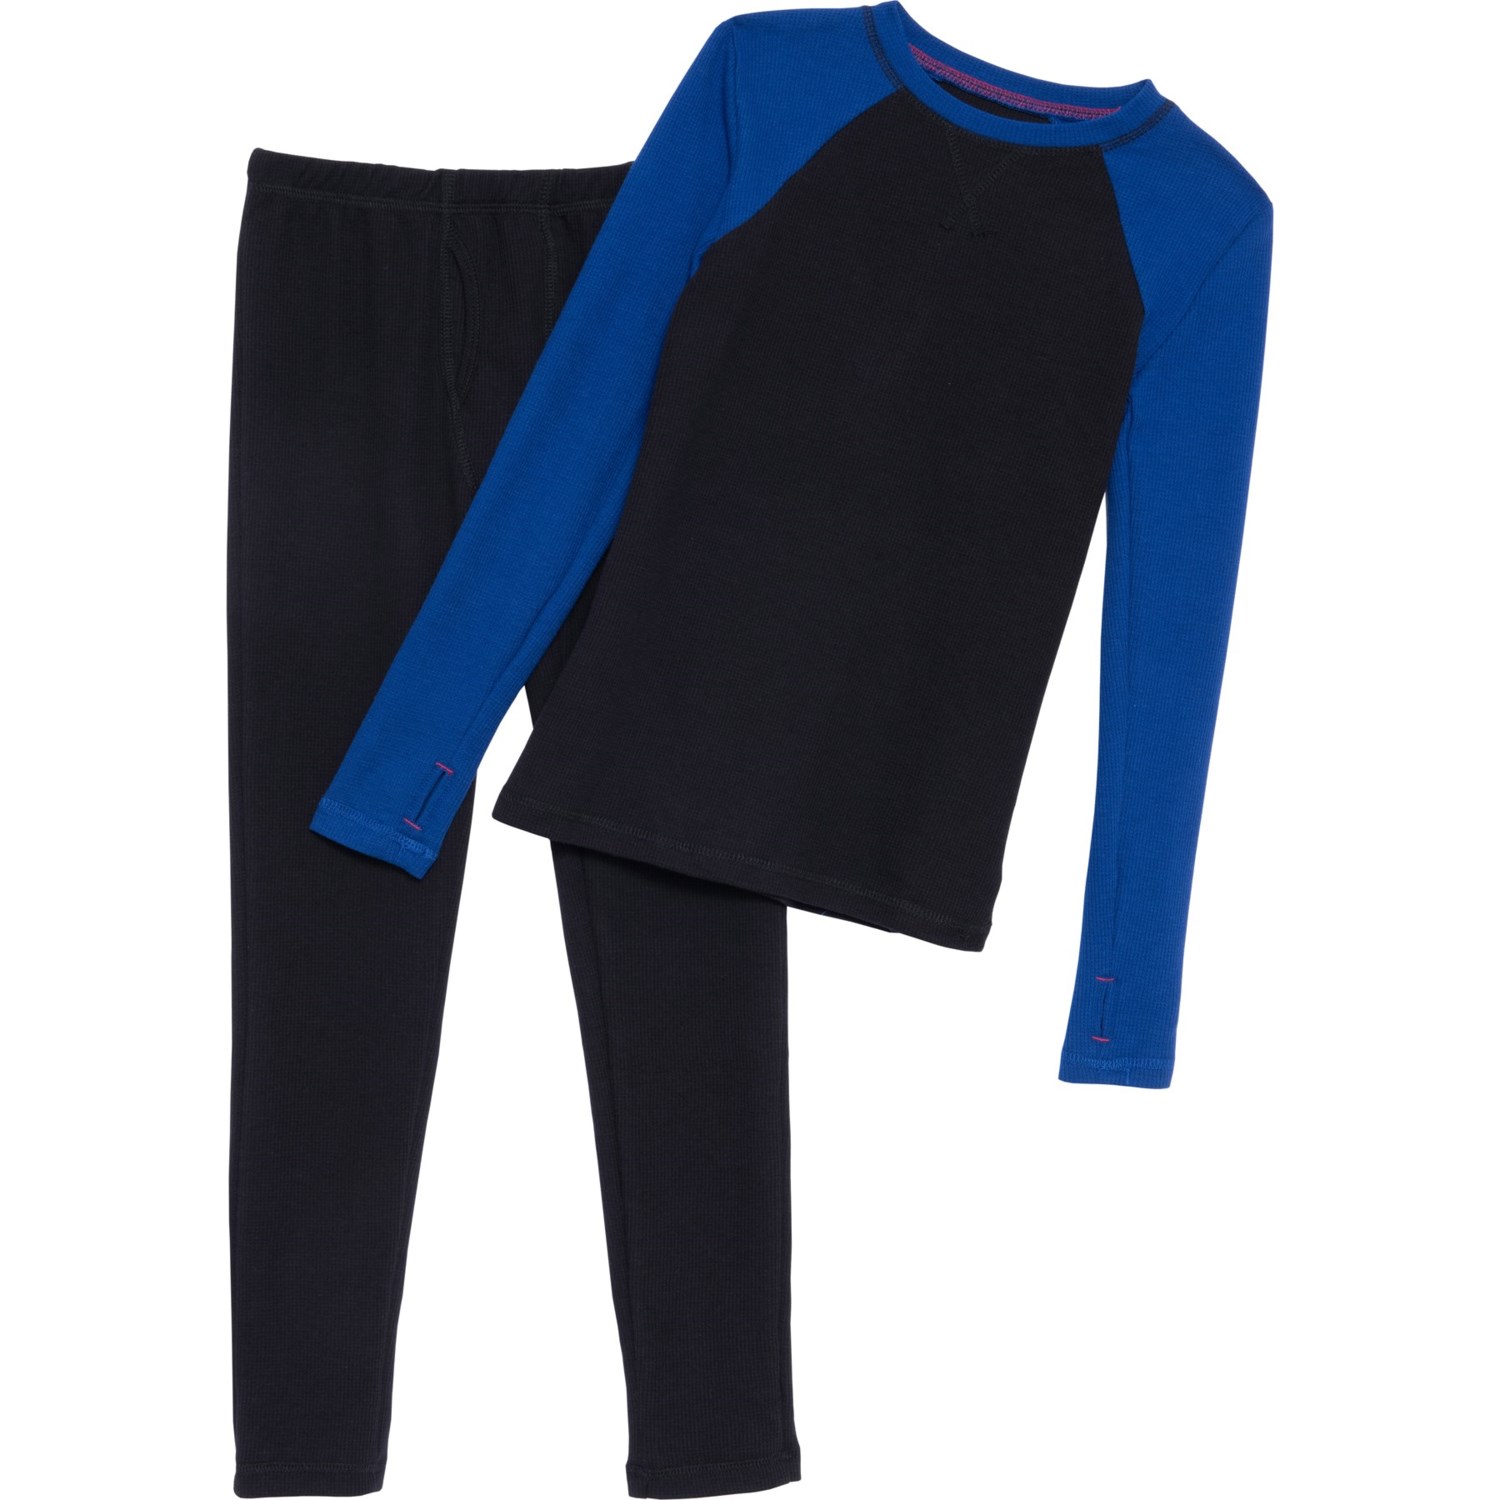 Cuddl Duds Big Boys Thermal High-Performance Base Layer Top and Pants Set -  Long Sleeve